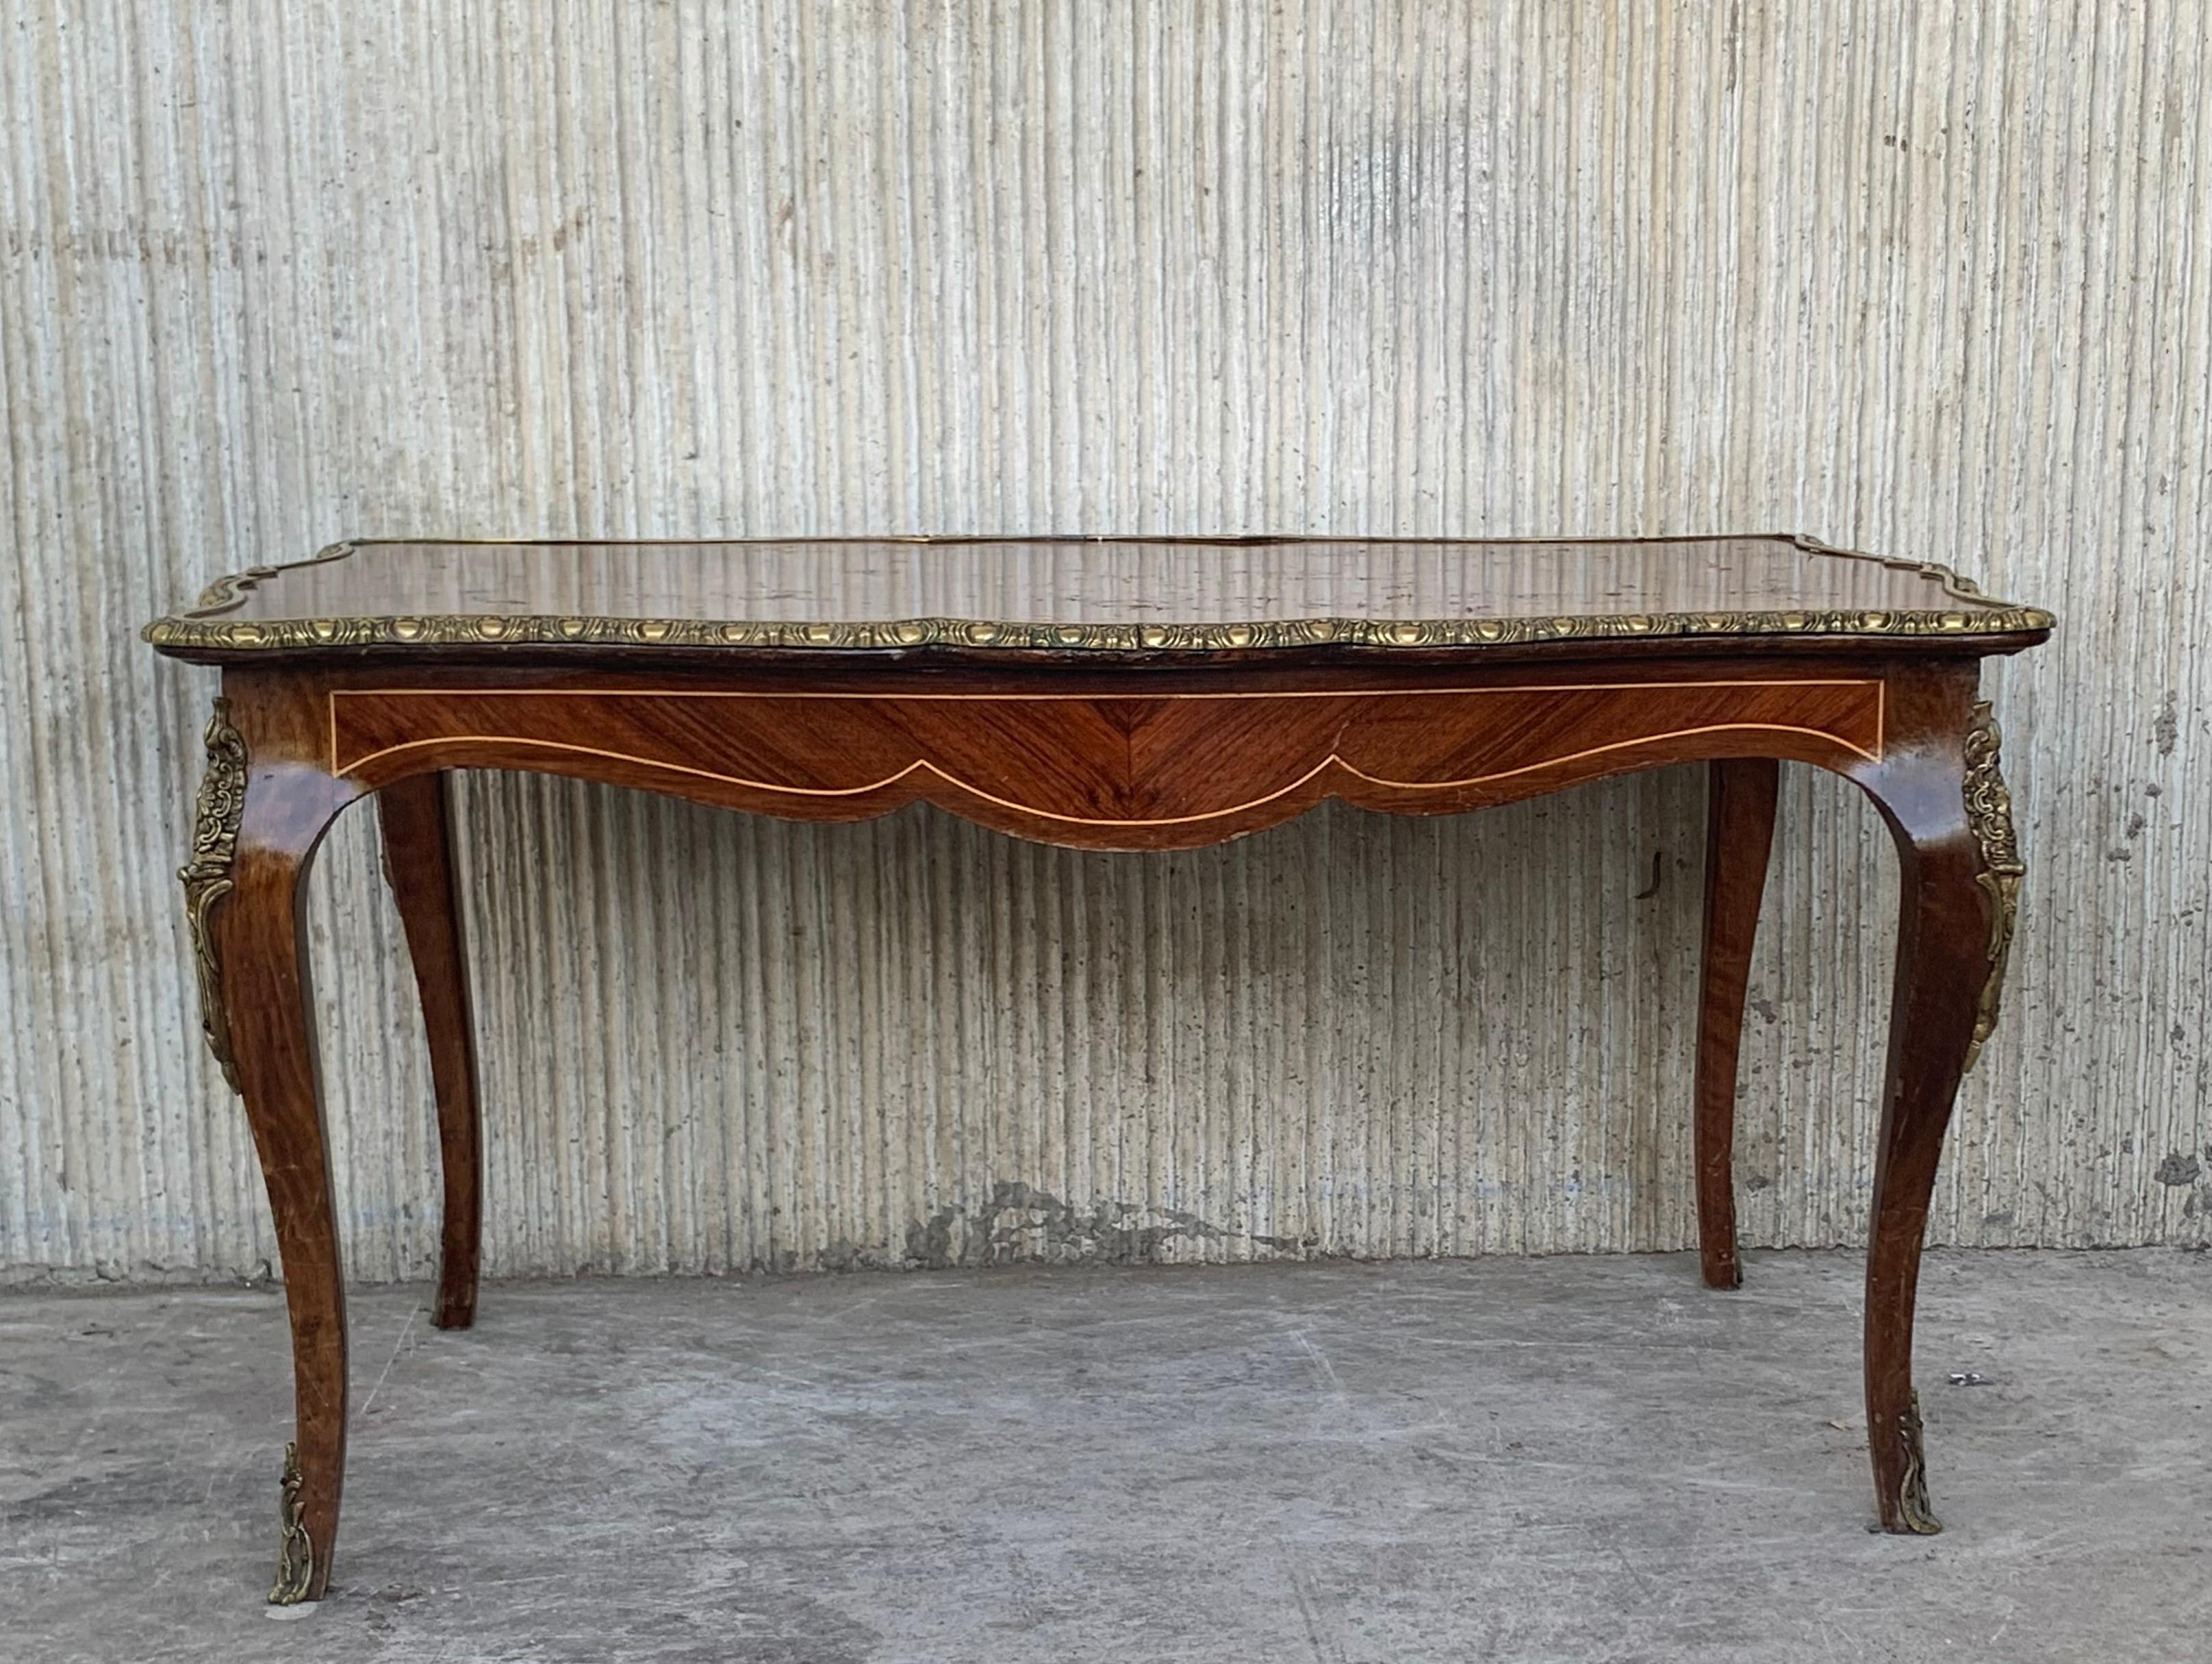 Wonderful French marquetry and bronze ormolu-mounted cocktail or coffee table.